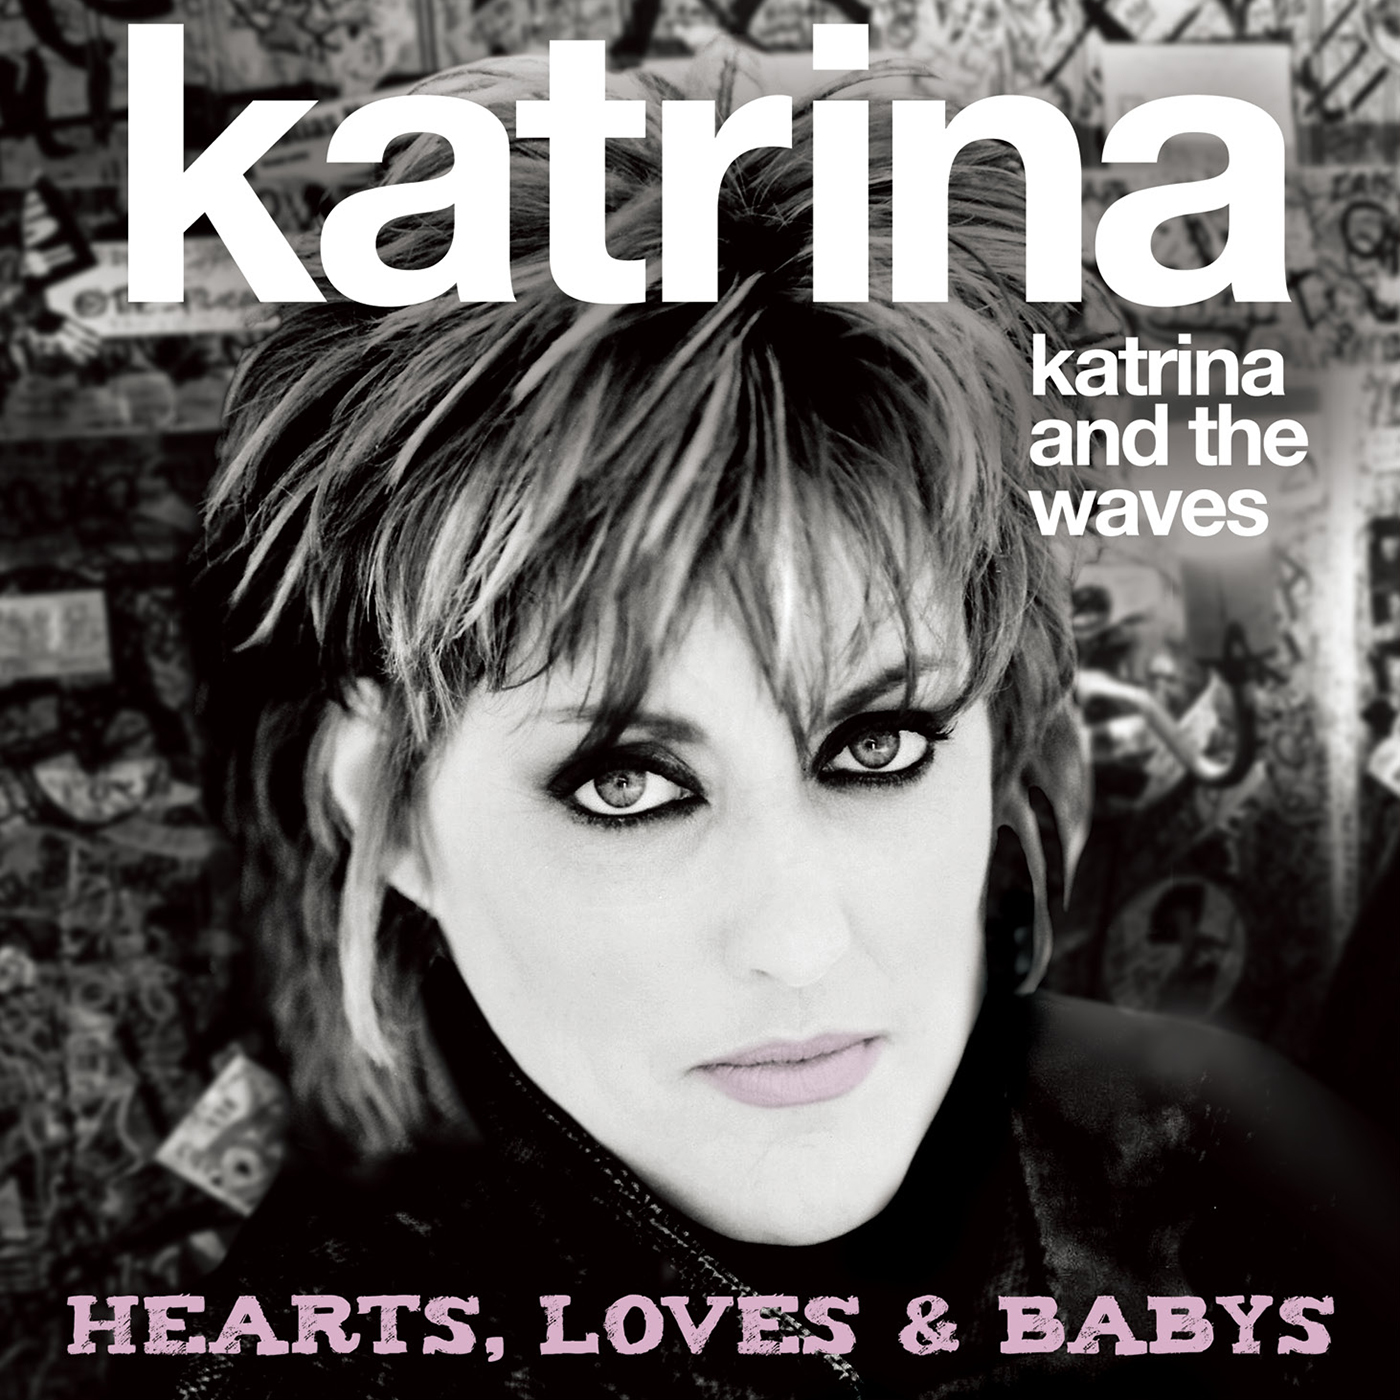 Katrina And The Waves - Walking On Sunshine, Releases